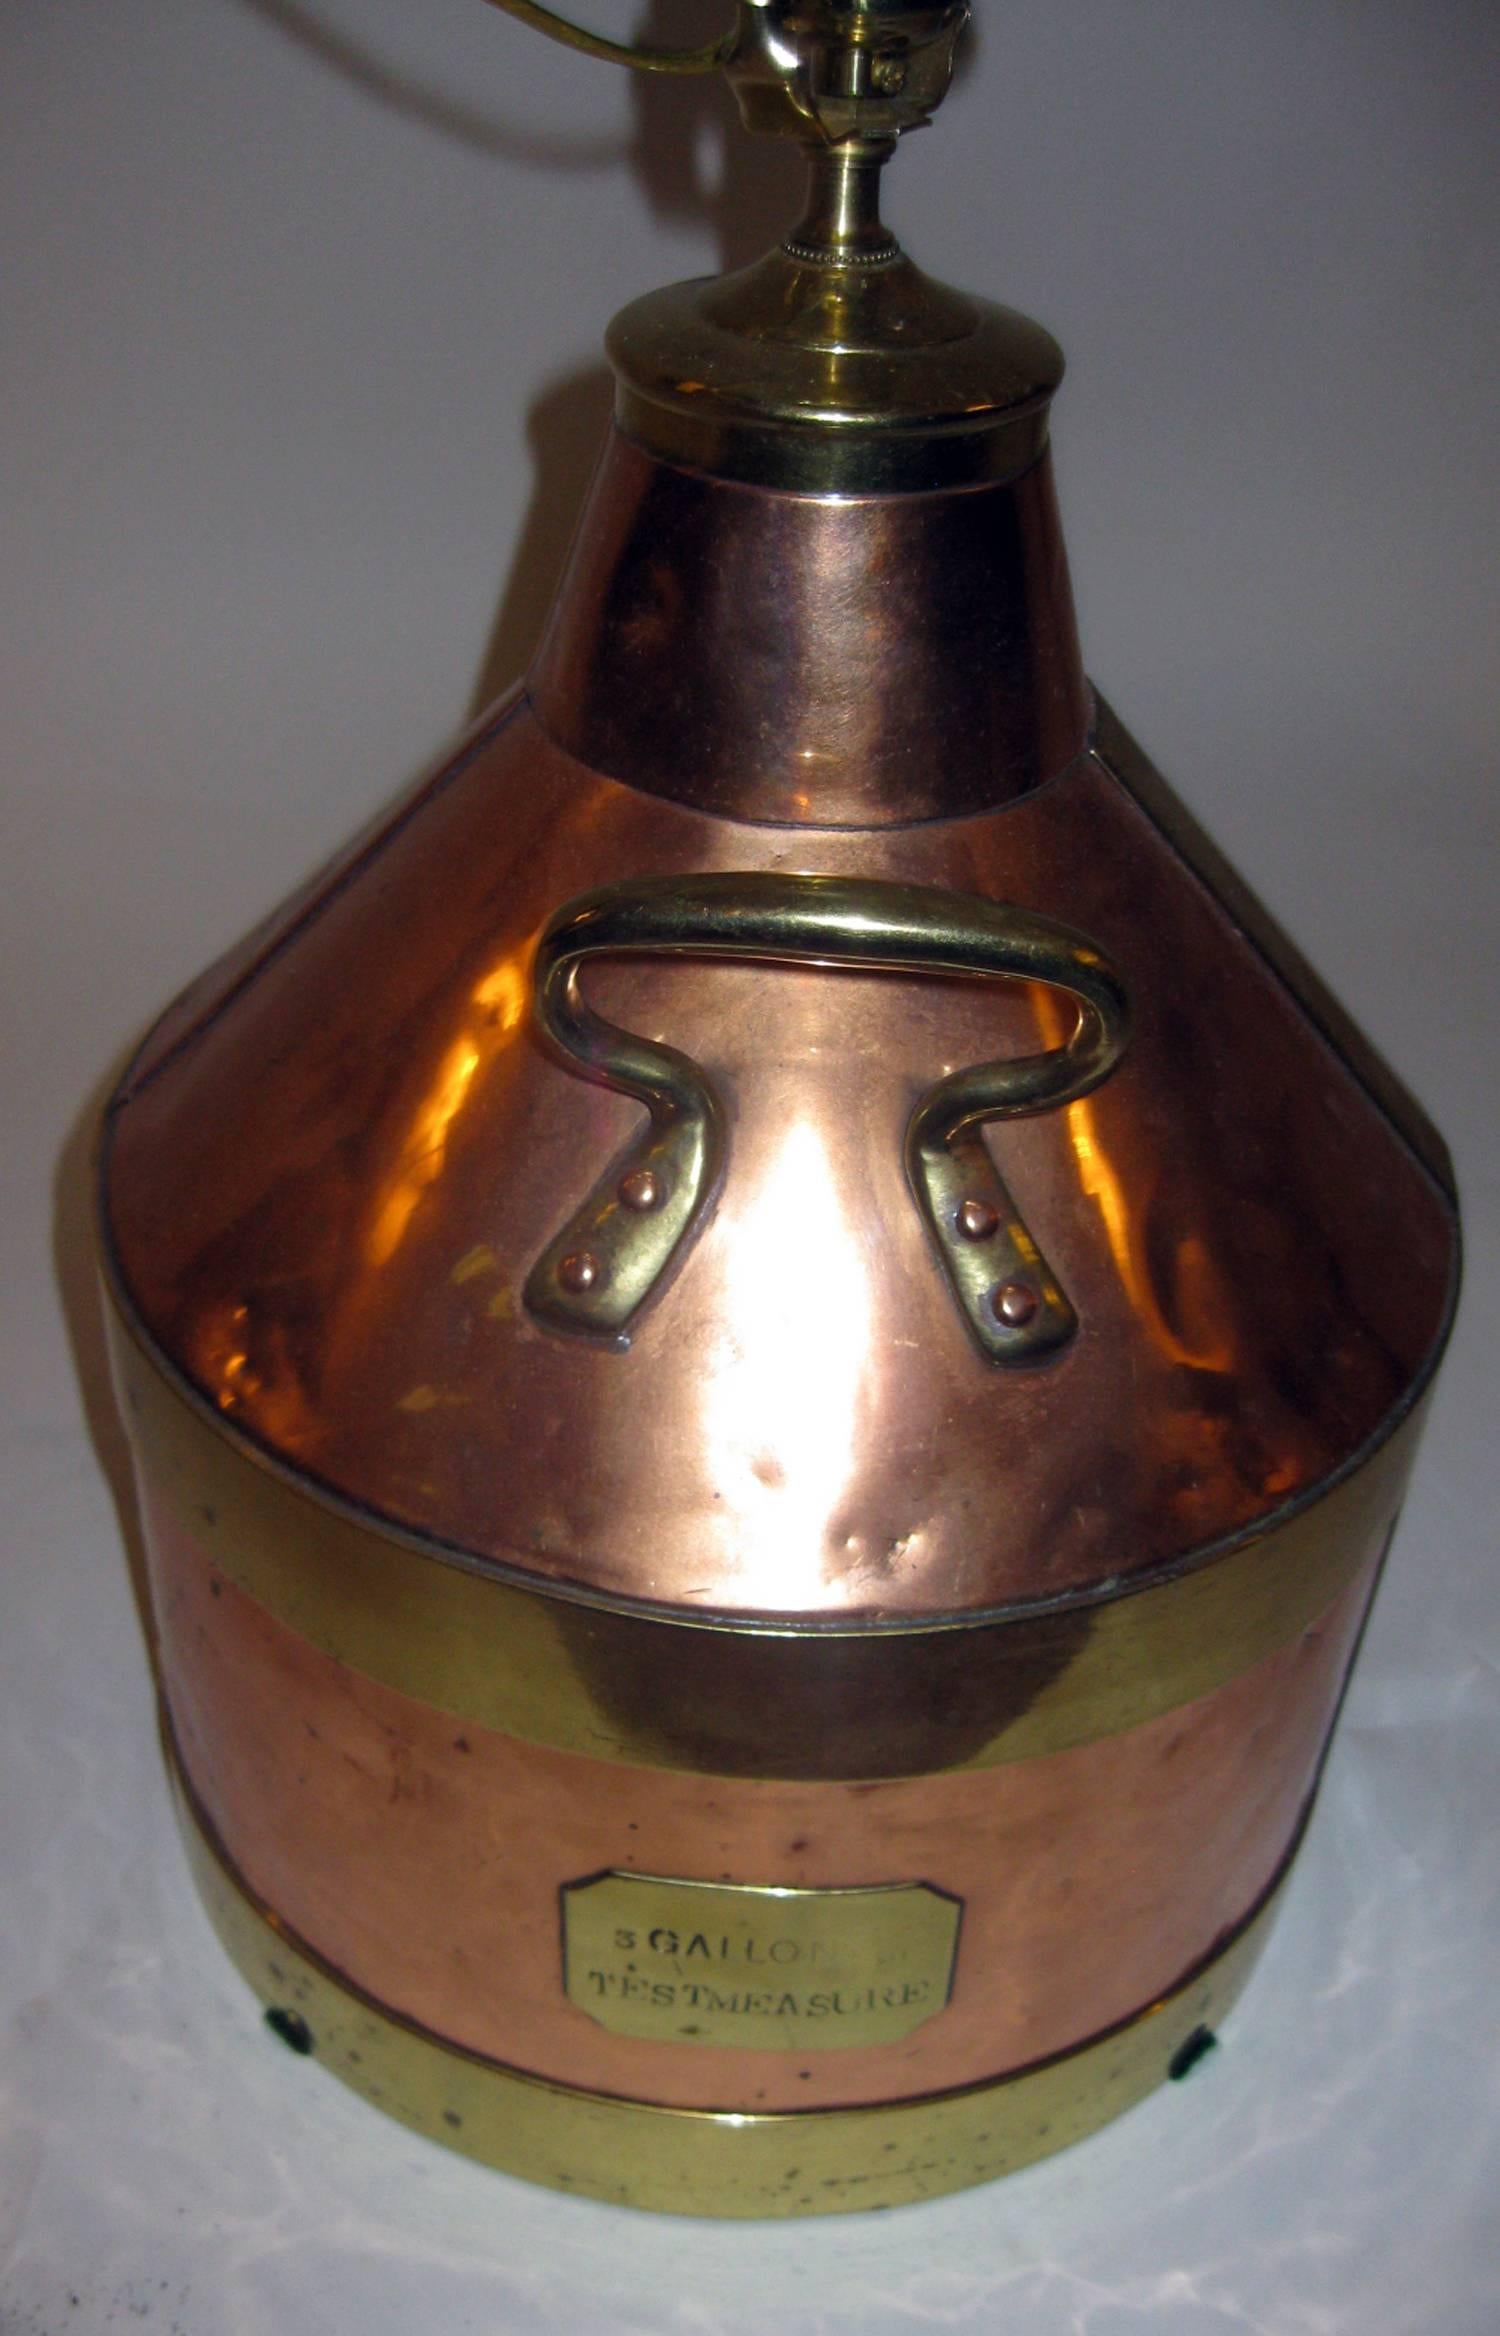 Table lamp converted from a large English copper jug. Features include applied brass riveted bales and handles with an appropriate burlap shade. In working condition, the jug itself has great patina and much character. There is an applied plaque